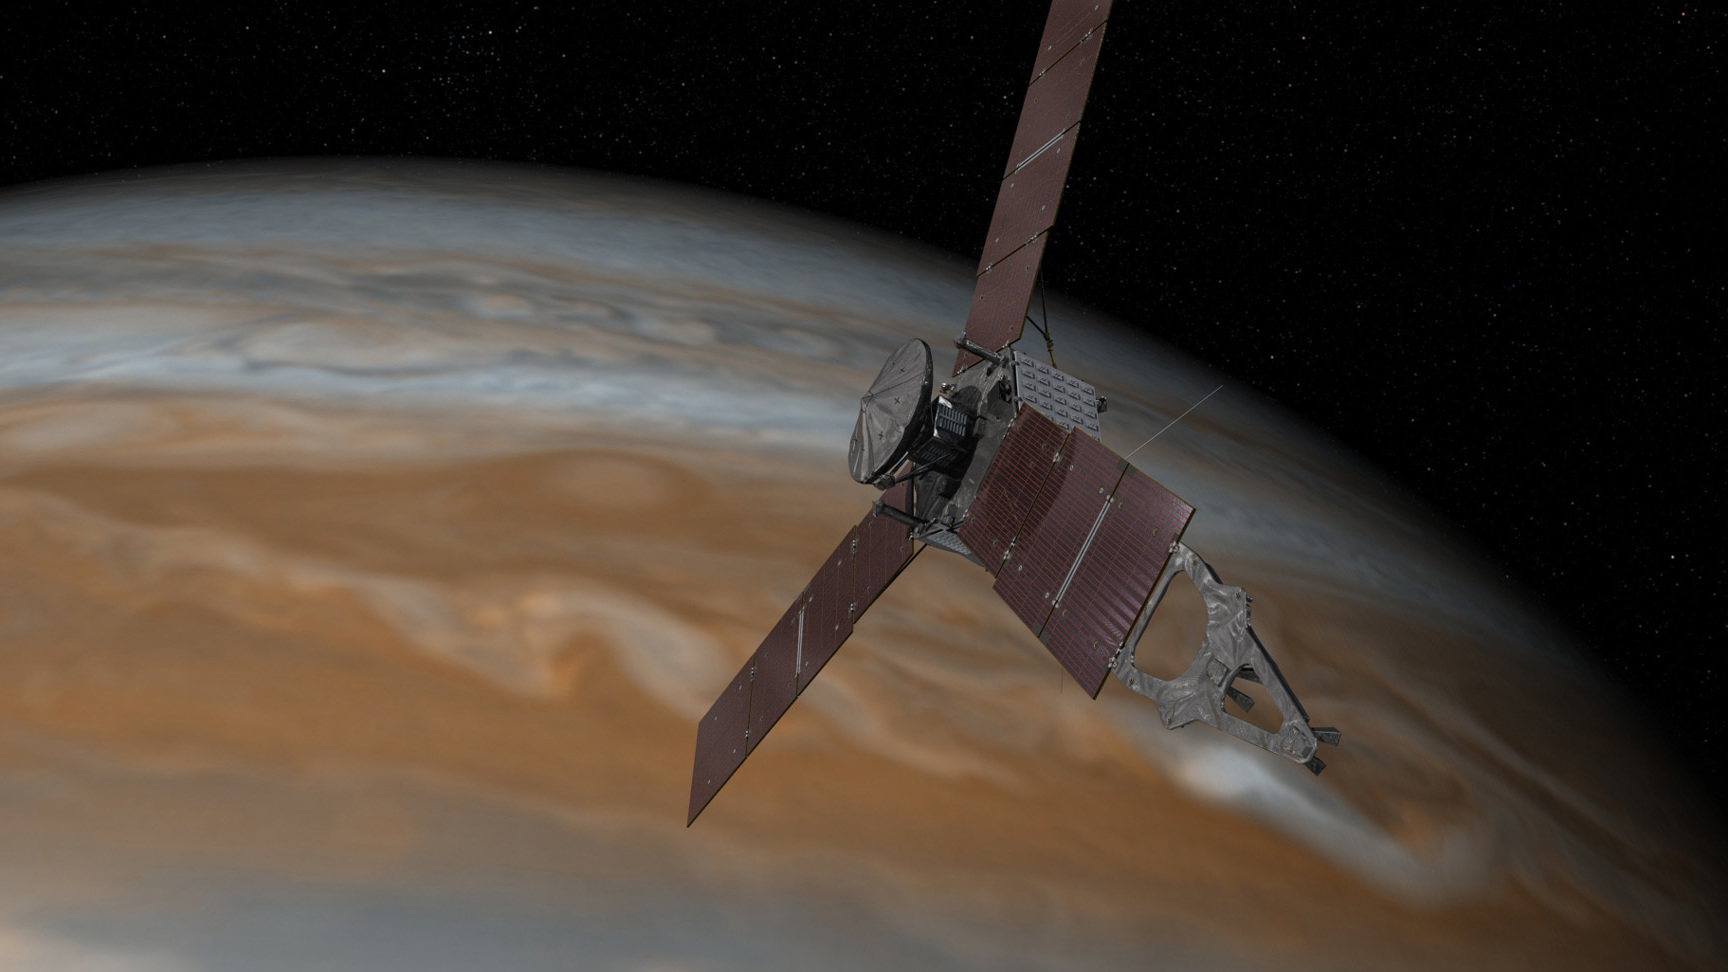 When it named this mission, NASA acknowledged its difficulty. Juno was a Roman goddess, the agency notes, "who was Jupiter’s wife, and who could also see through clouds